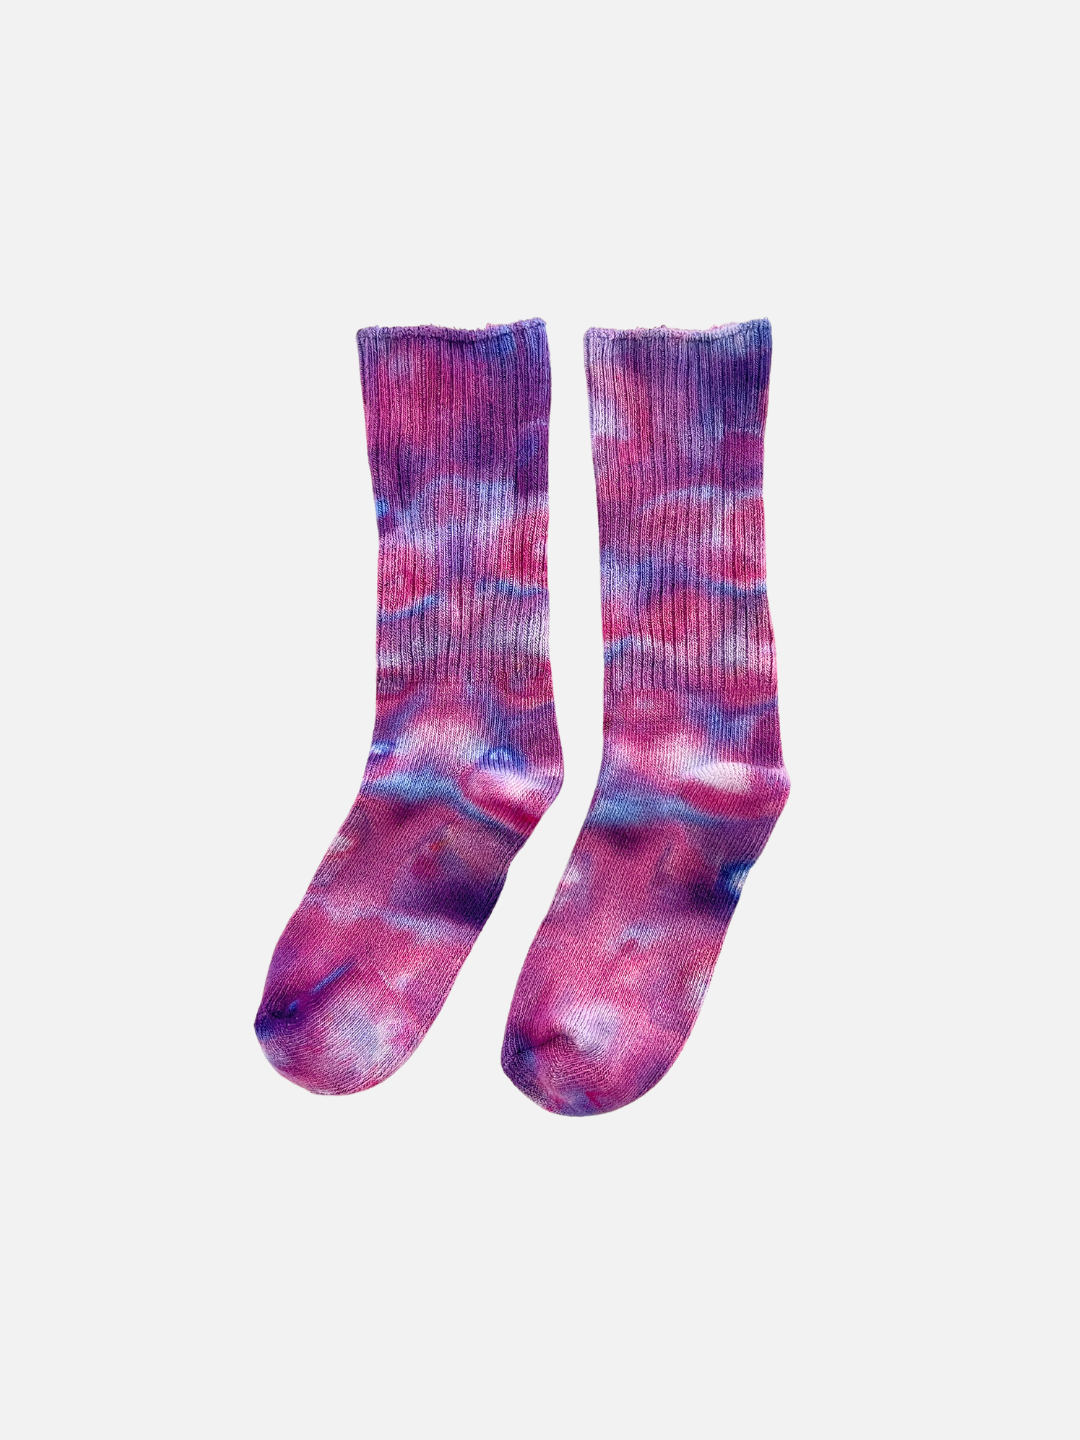 A pair of kids' ankle socks in dappled shades of purple and pink